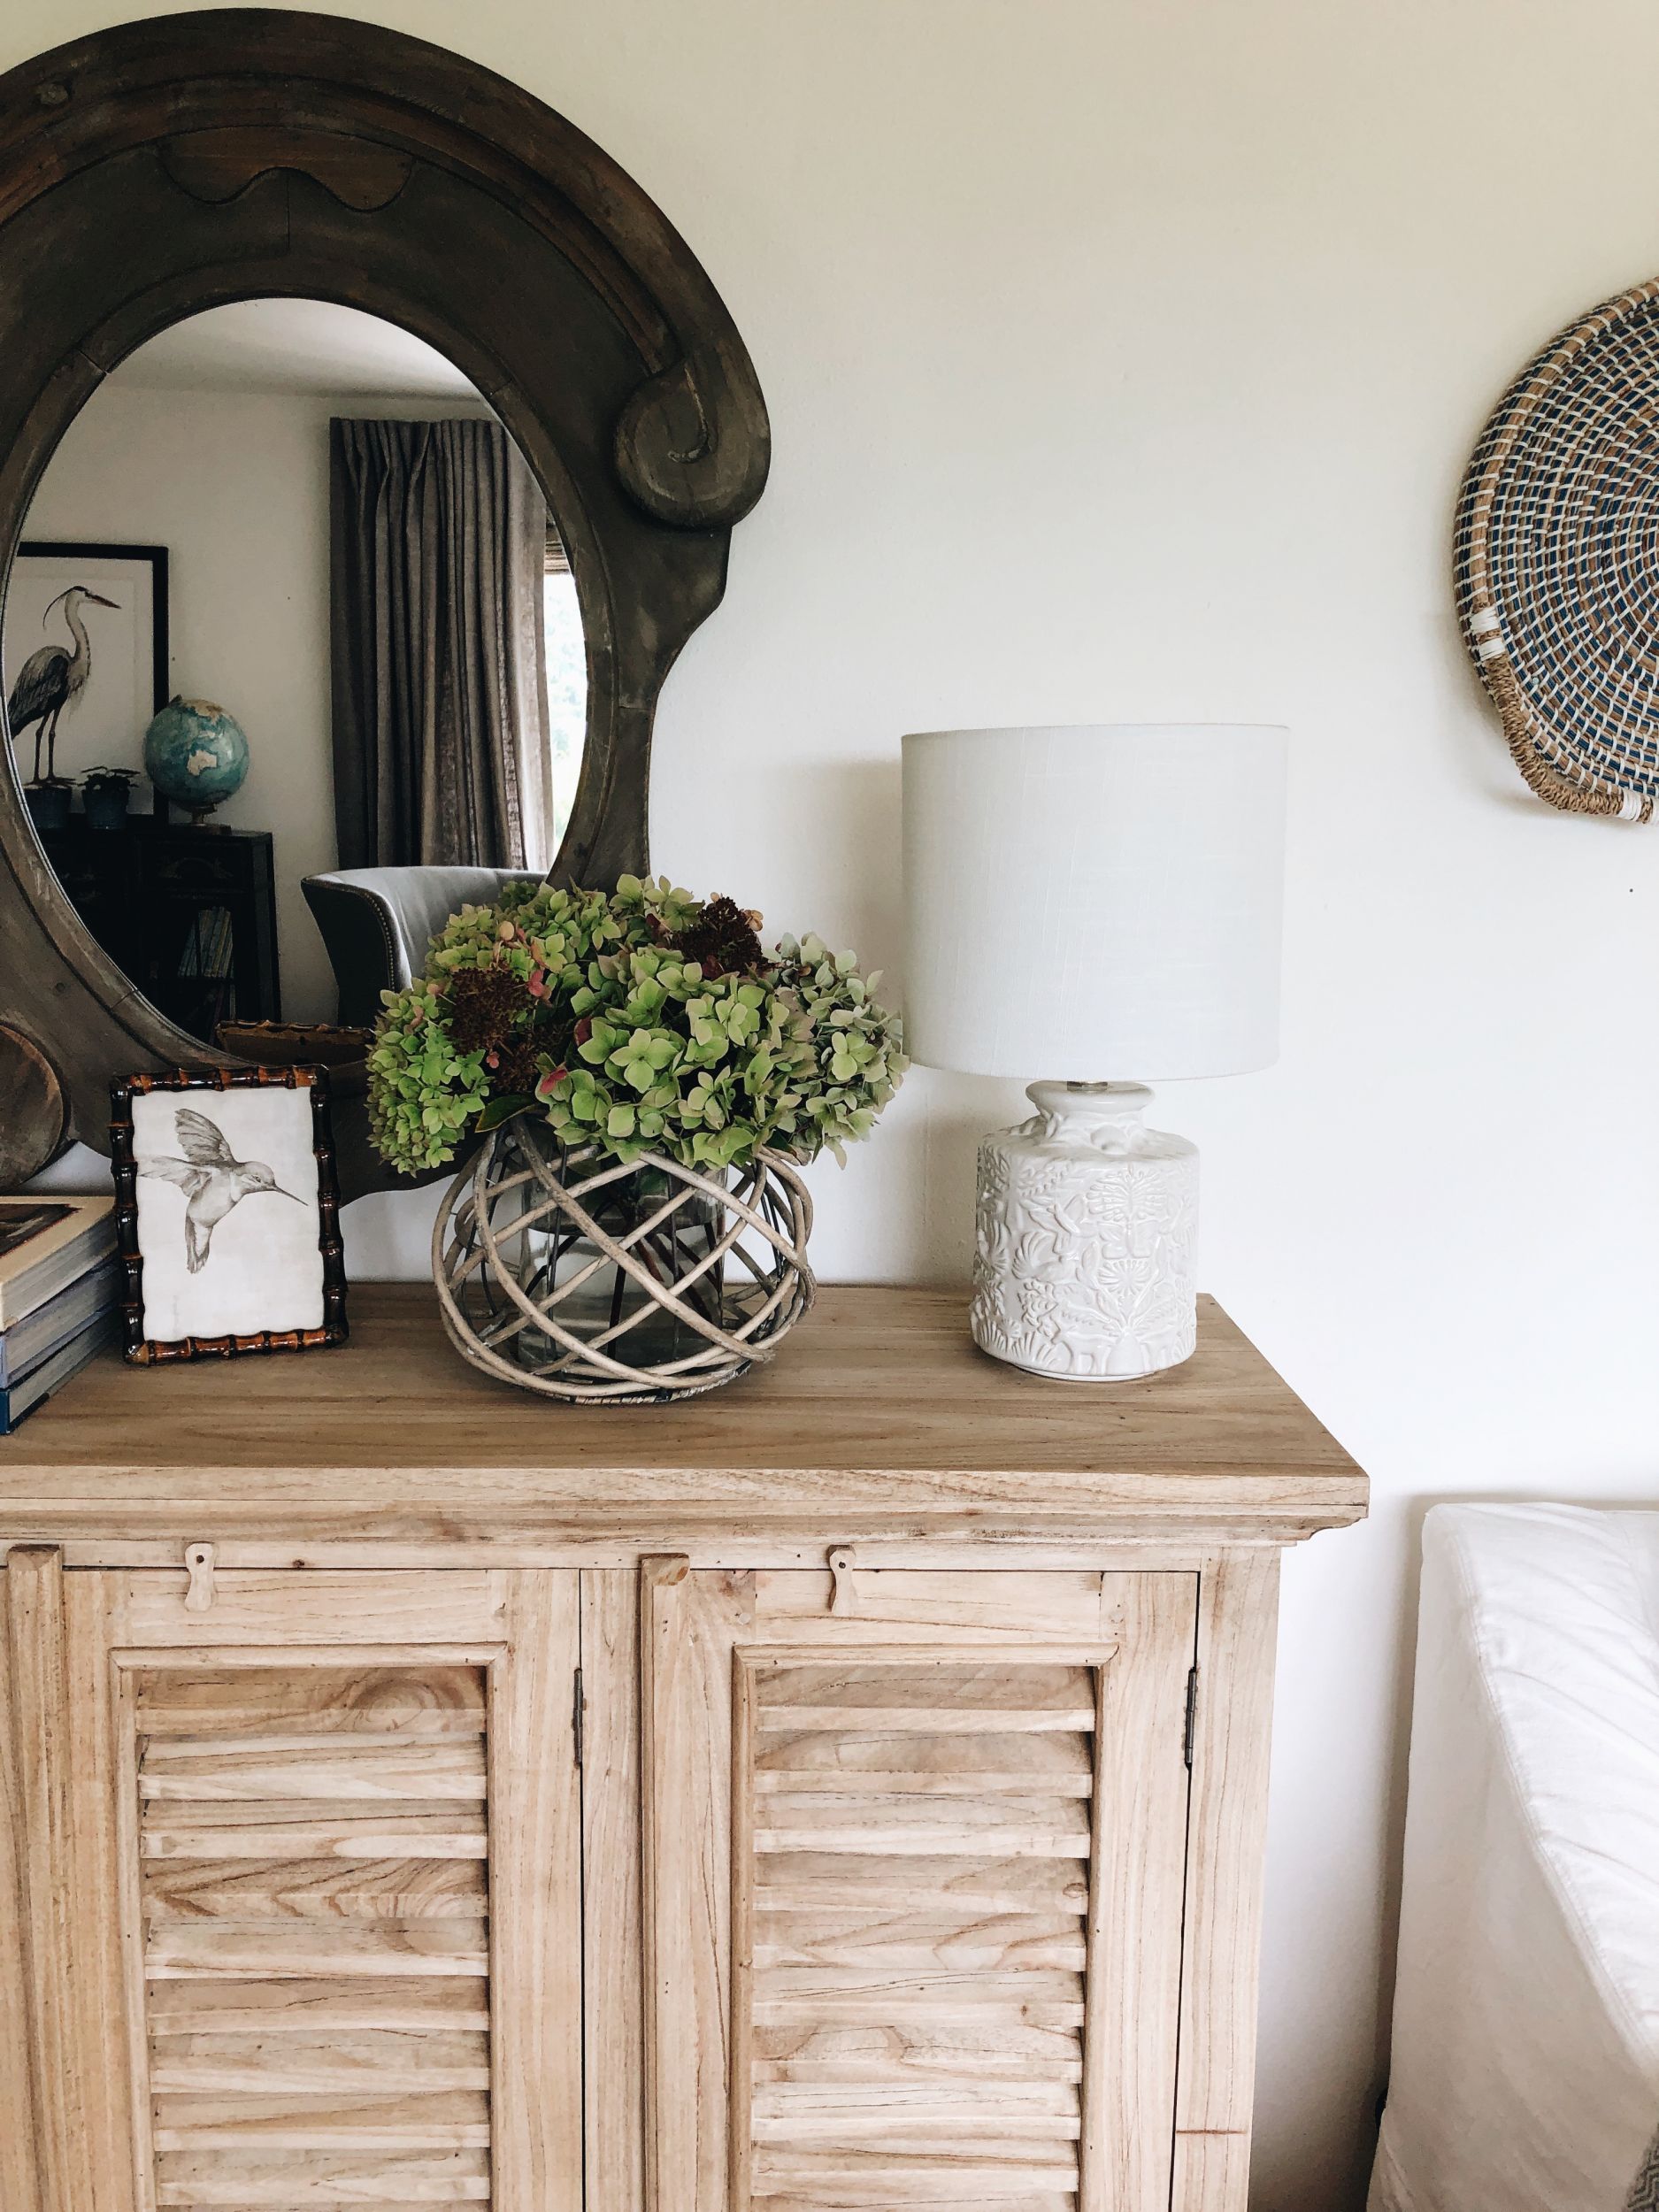 3 Ways I'm Simplifying My Home This Year